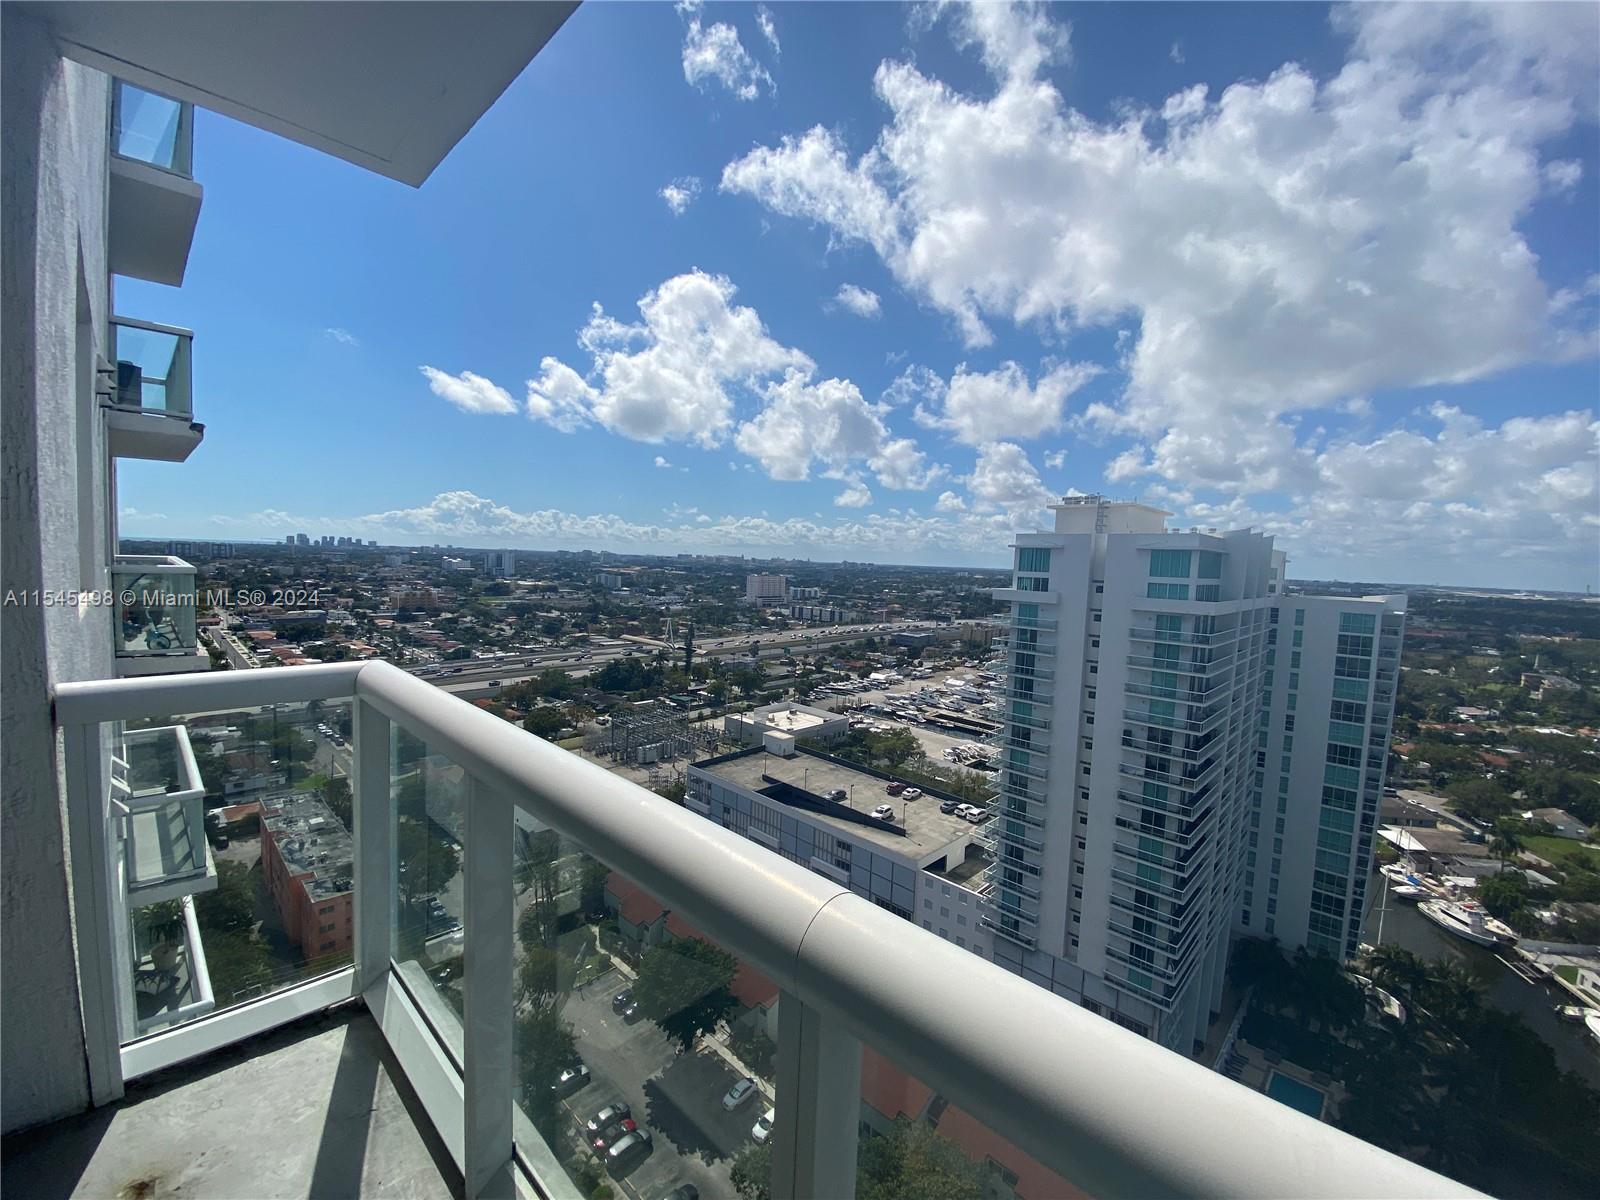 Photo of 1861 NW S River Dr #2102 in Miami, FL